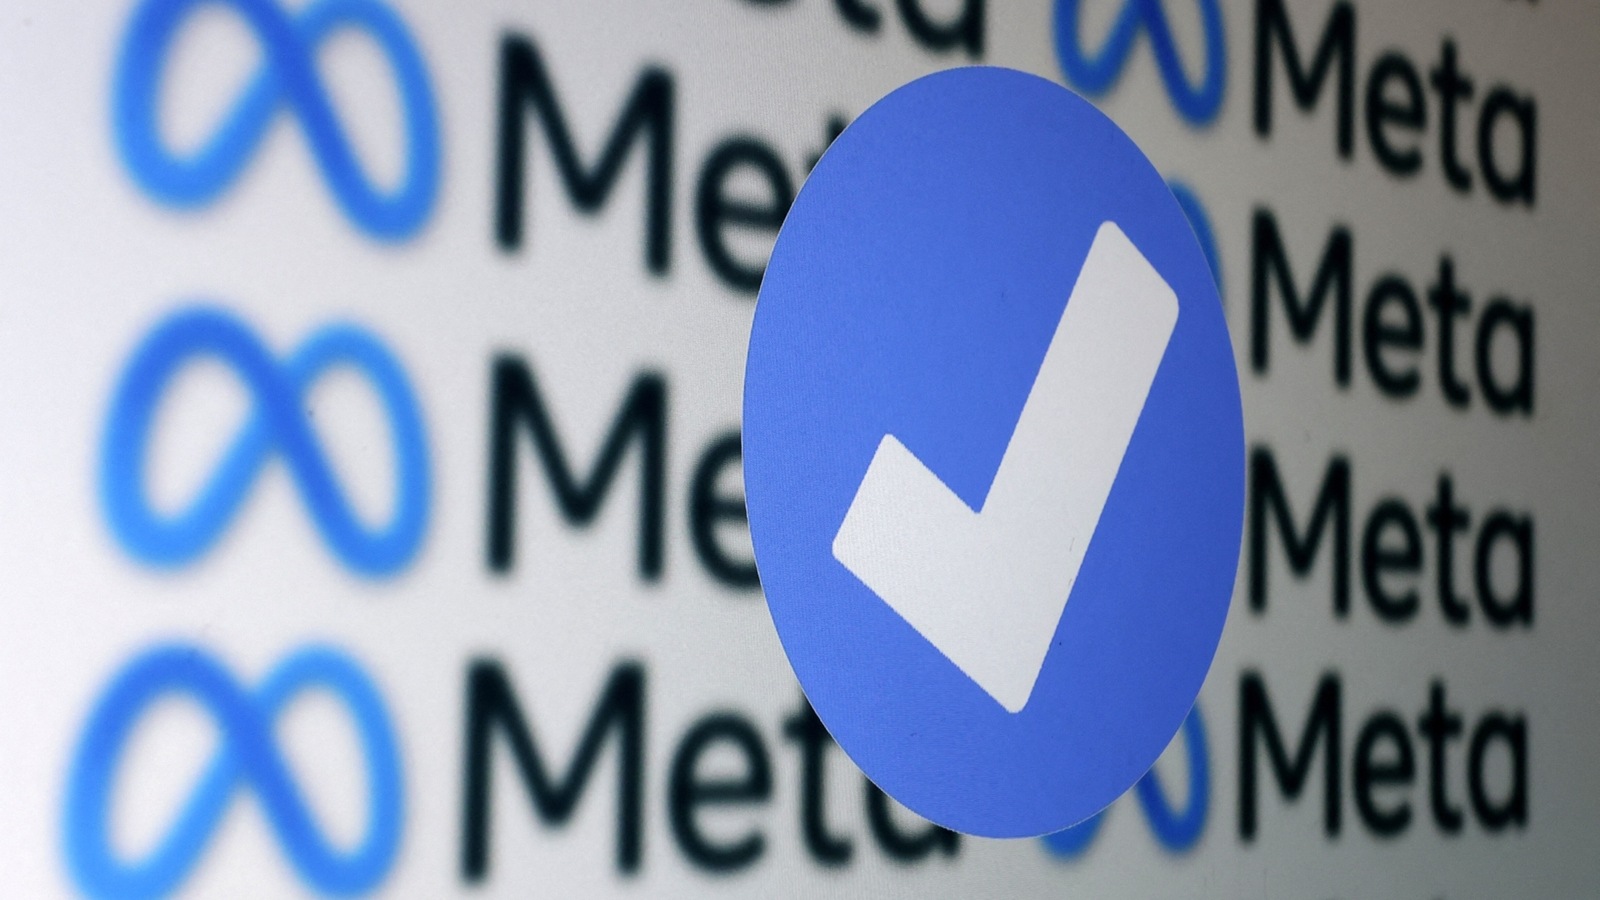 Meta testing new paid 'verified' accounts on Facebook, Instagram